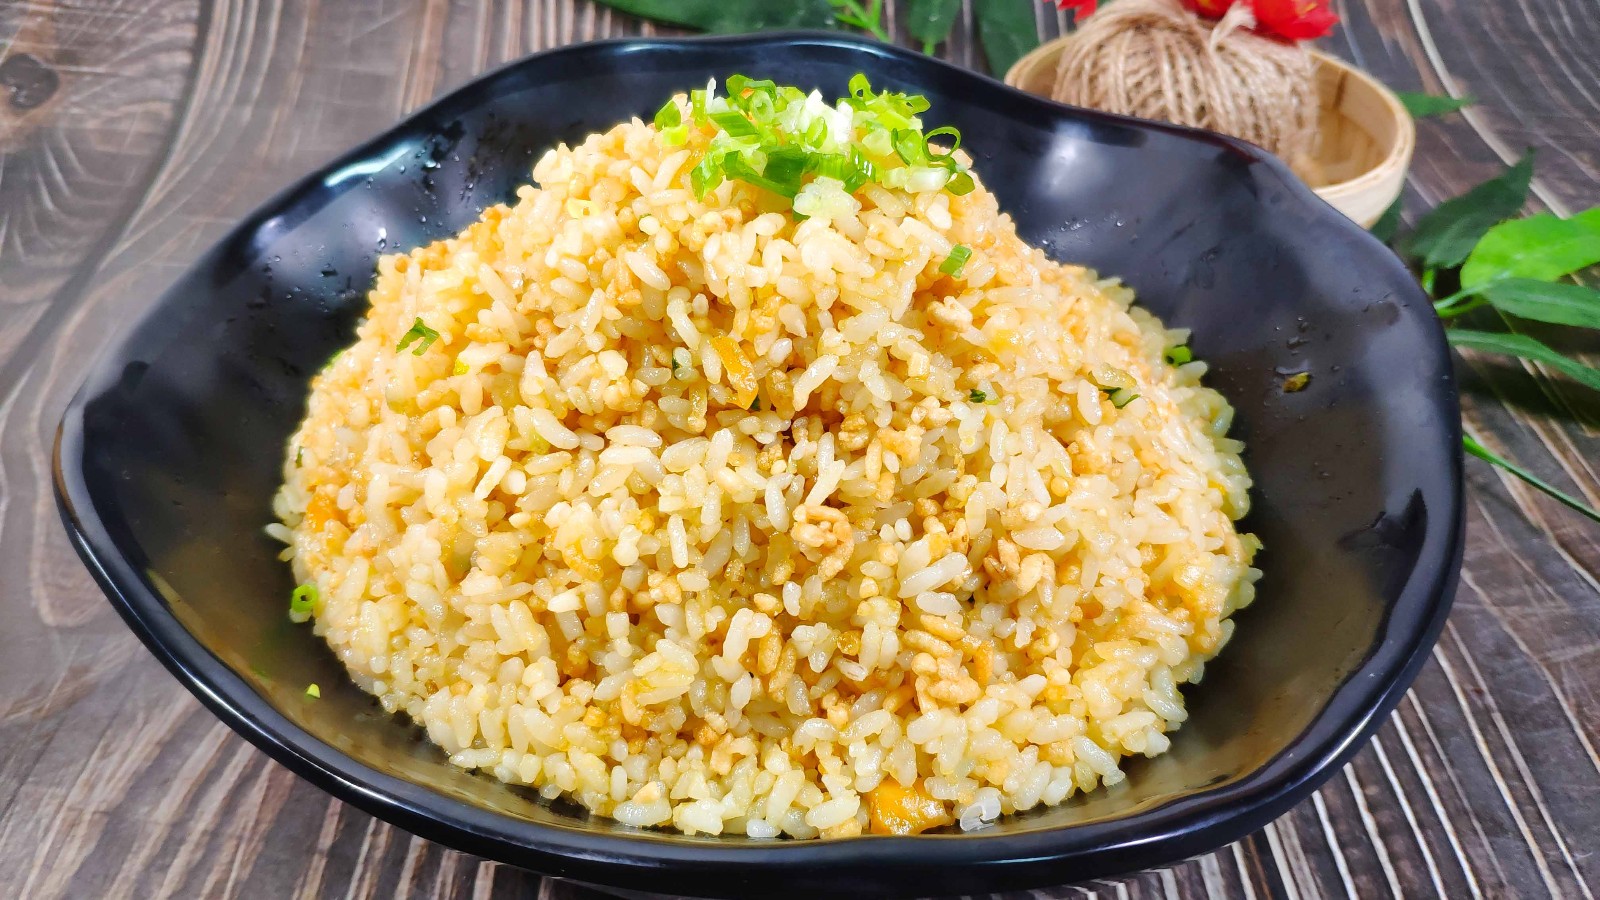 Lao Liu teaches you that fried rice with salted egg yolk is golden in color, fragrance and taste, which is more delicious than that made in restaurants.